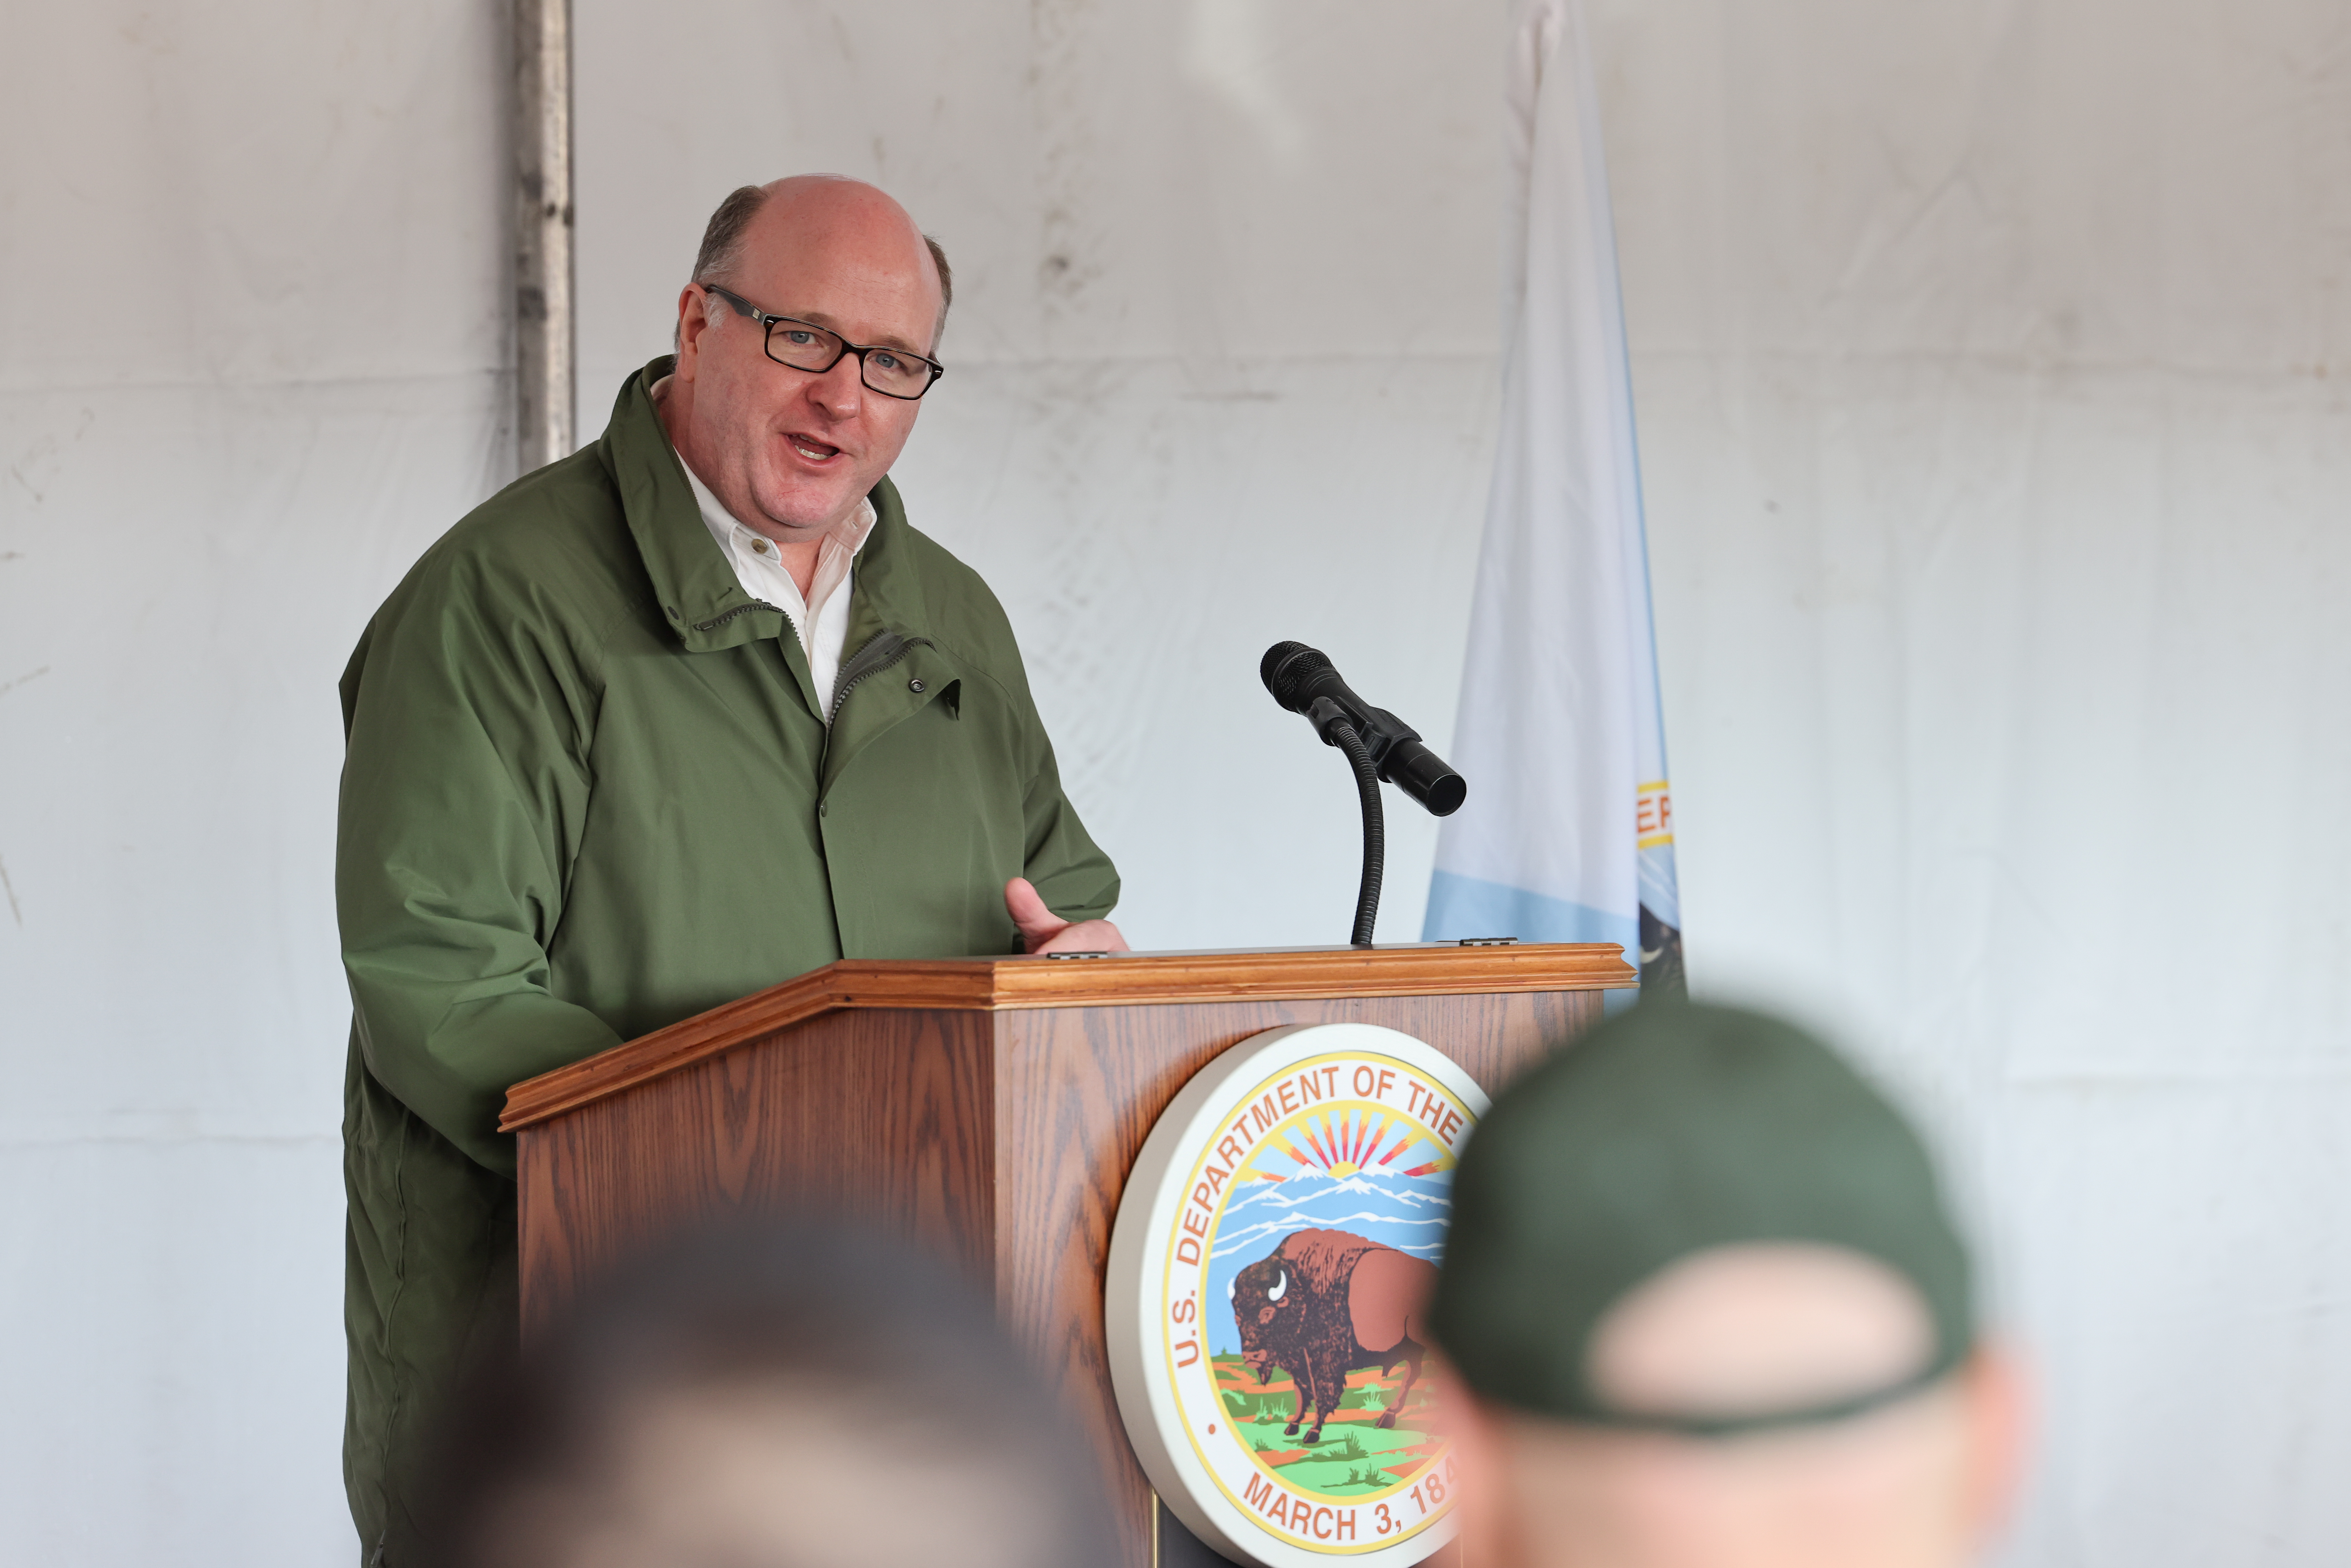 Tom Shope, OSMRE Regions 1 & 2 director and field special assistant to the secretary, speaks before the Plant a Tree at Flight 93 event at the Flight 93 National Memorial, Somerset County, Pennsylvania, April 22, 2022. The event highlighted more than 10 years of work and events to plant over 150,000 trees, across 214 acres of former coal mine land. (Photo courtesy of NPS/B. Torrey)